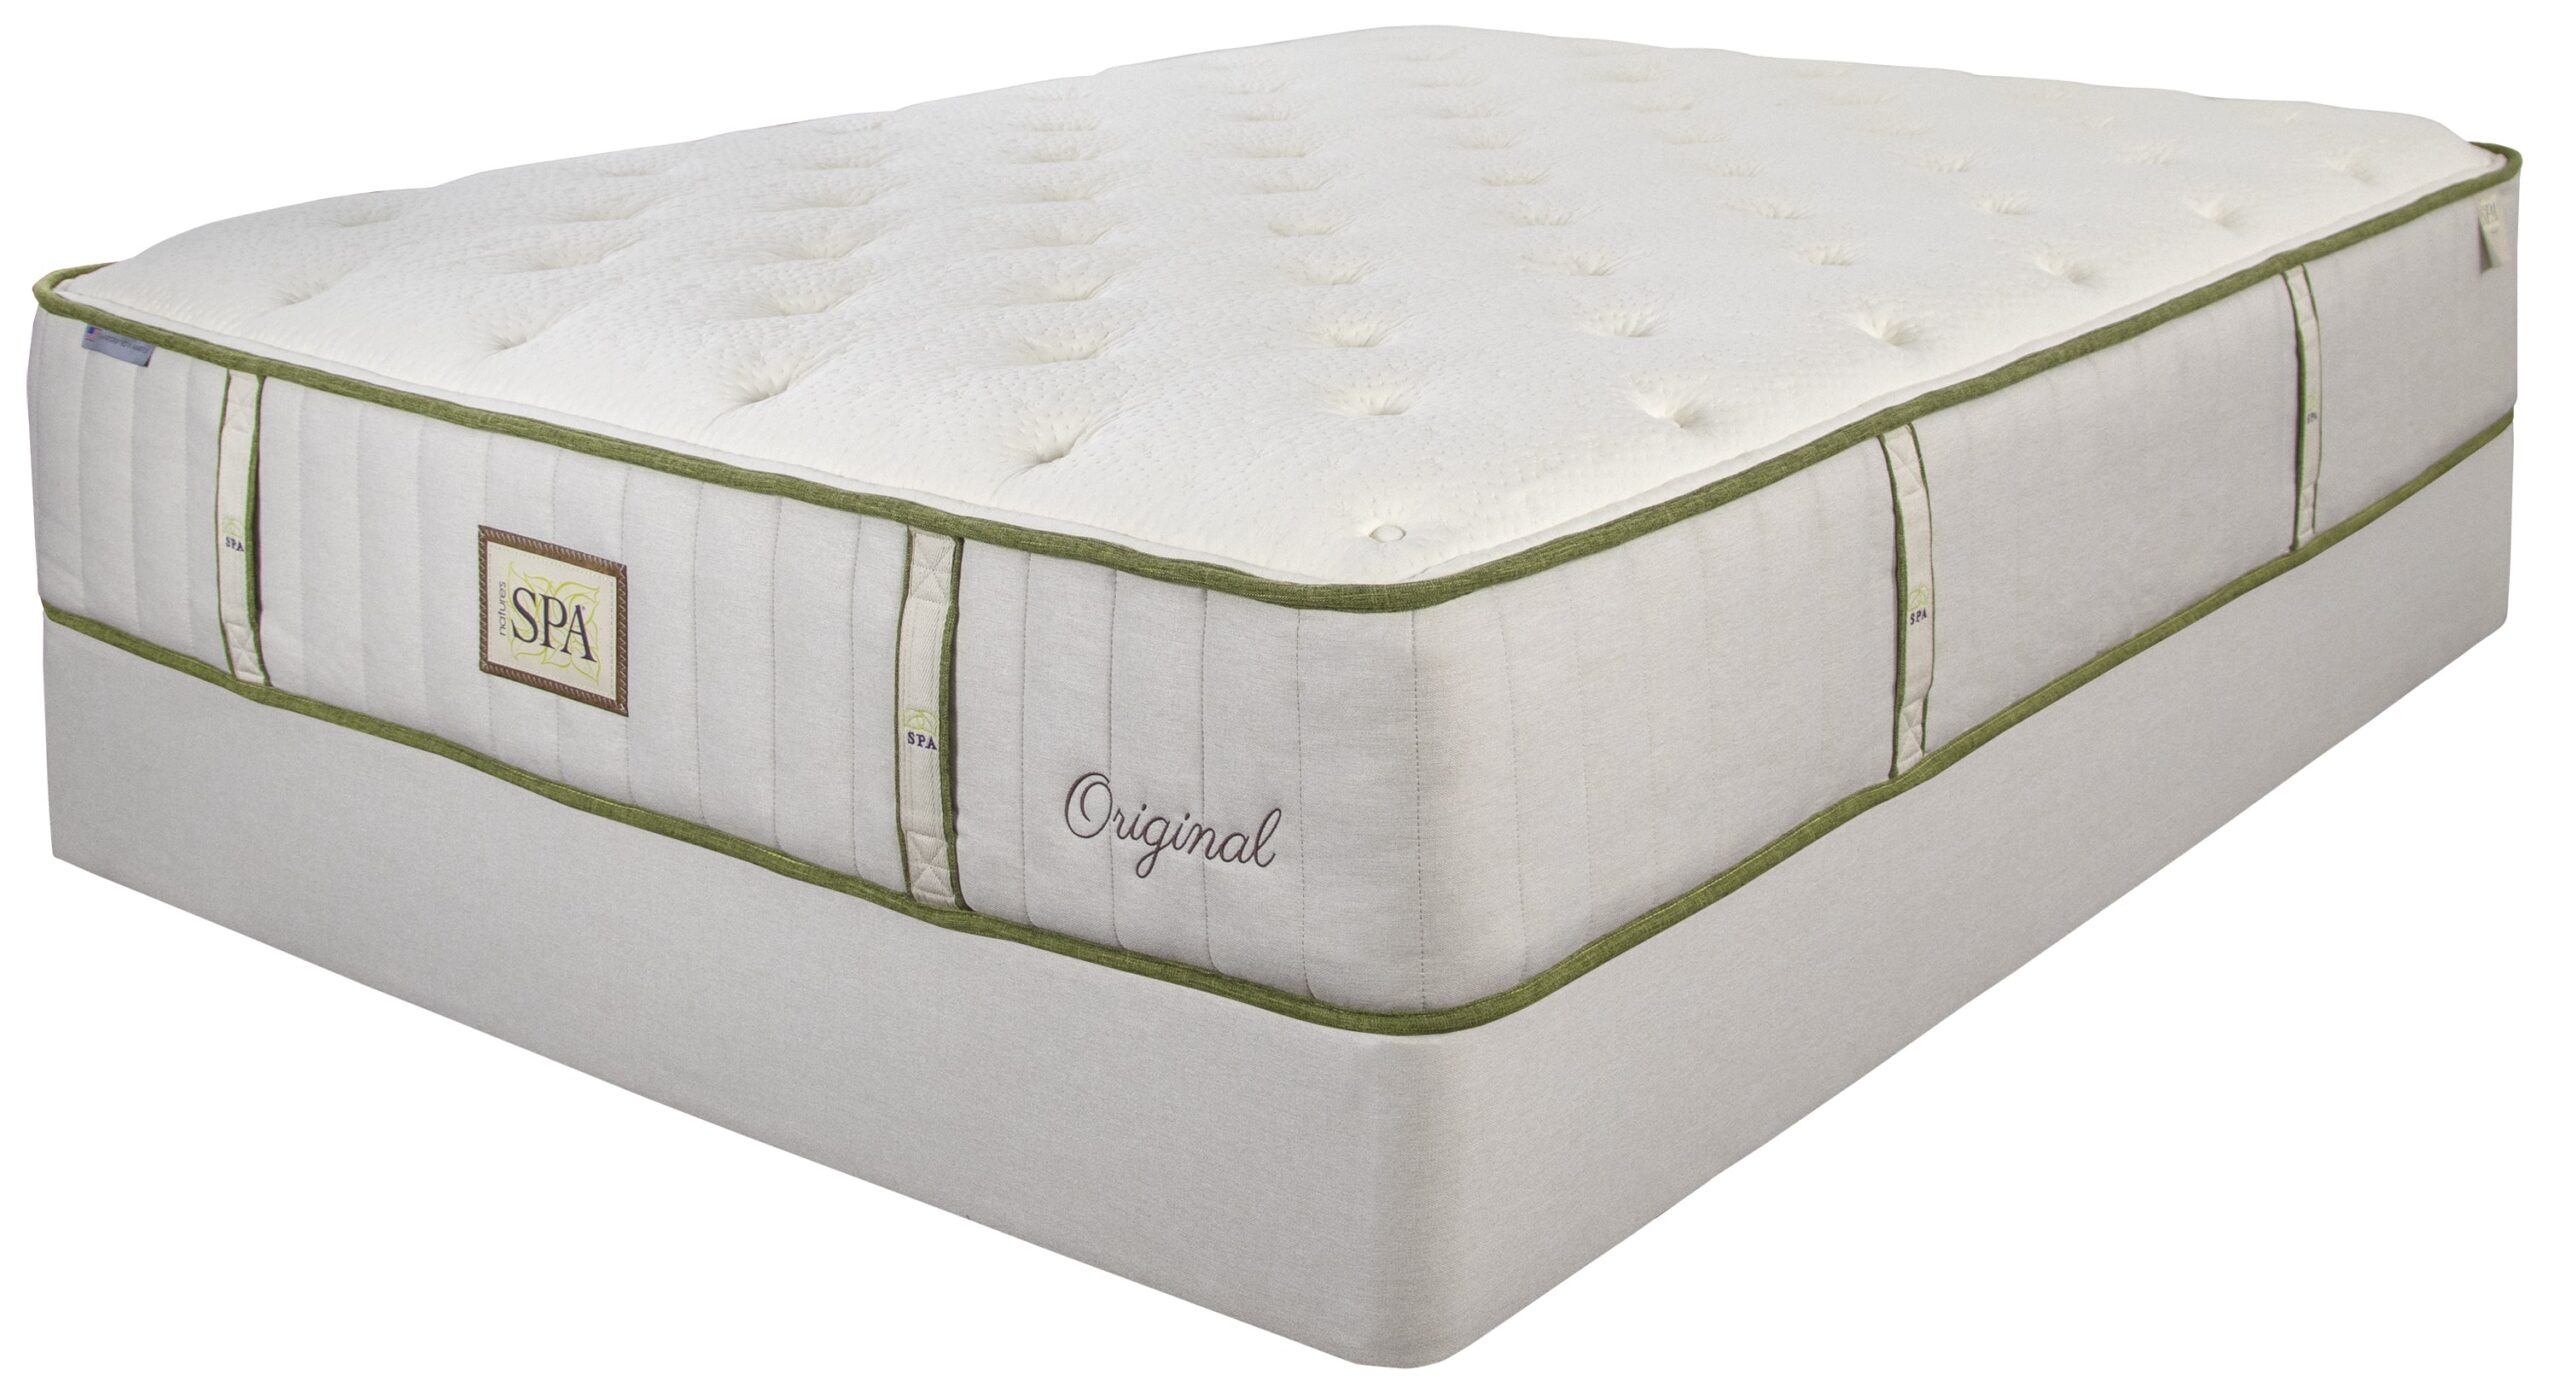 natures spa by paramount twin size mattresses